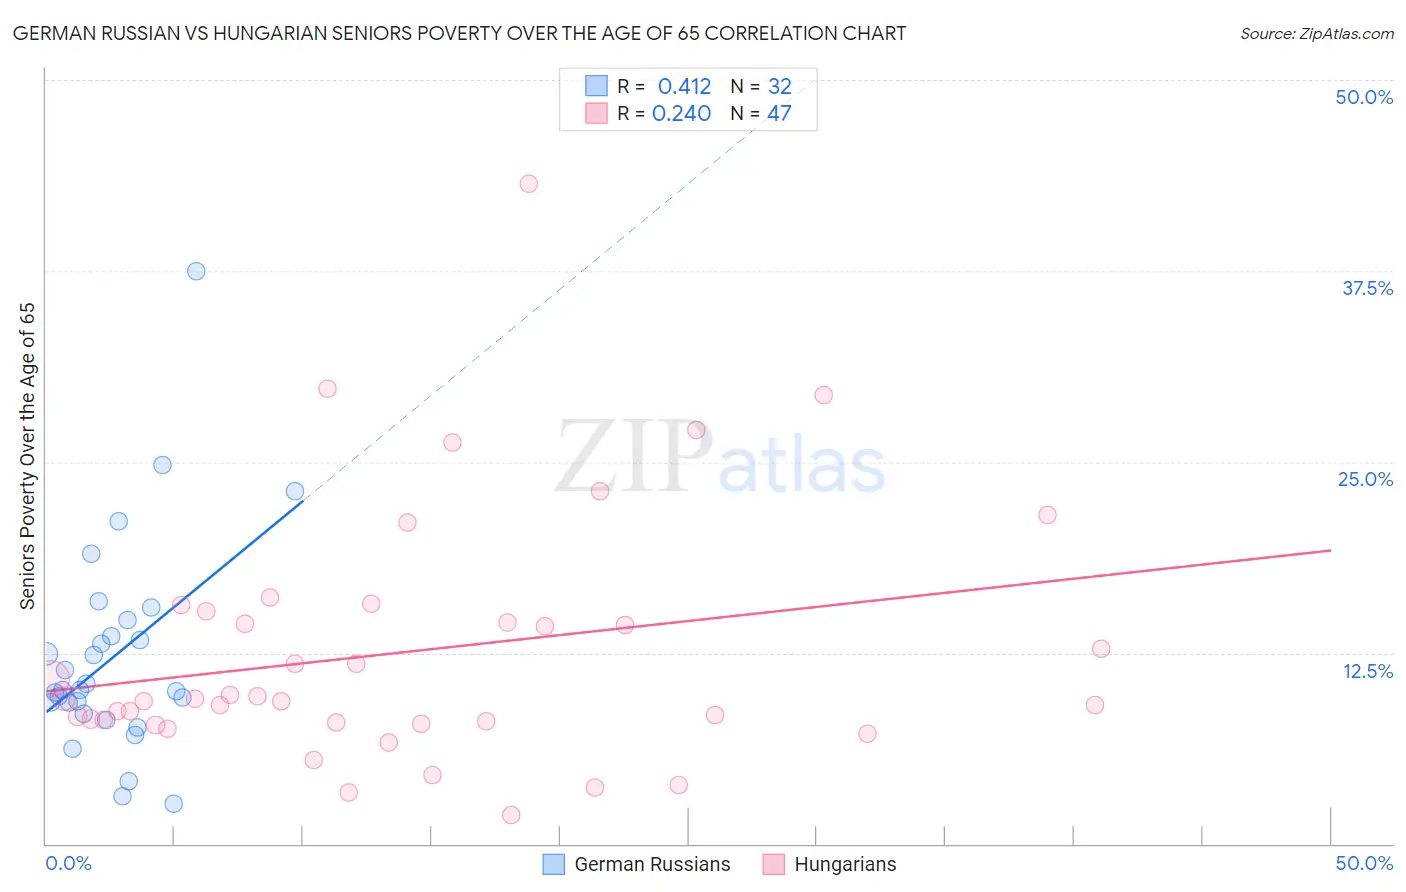 German Russian vs Hungarian Seniors Poverty Over the Age of 65